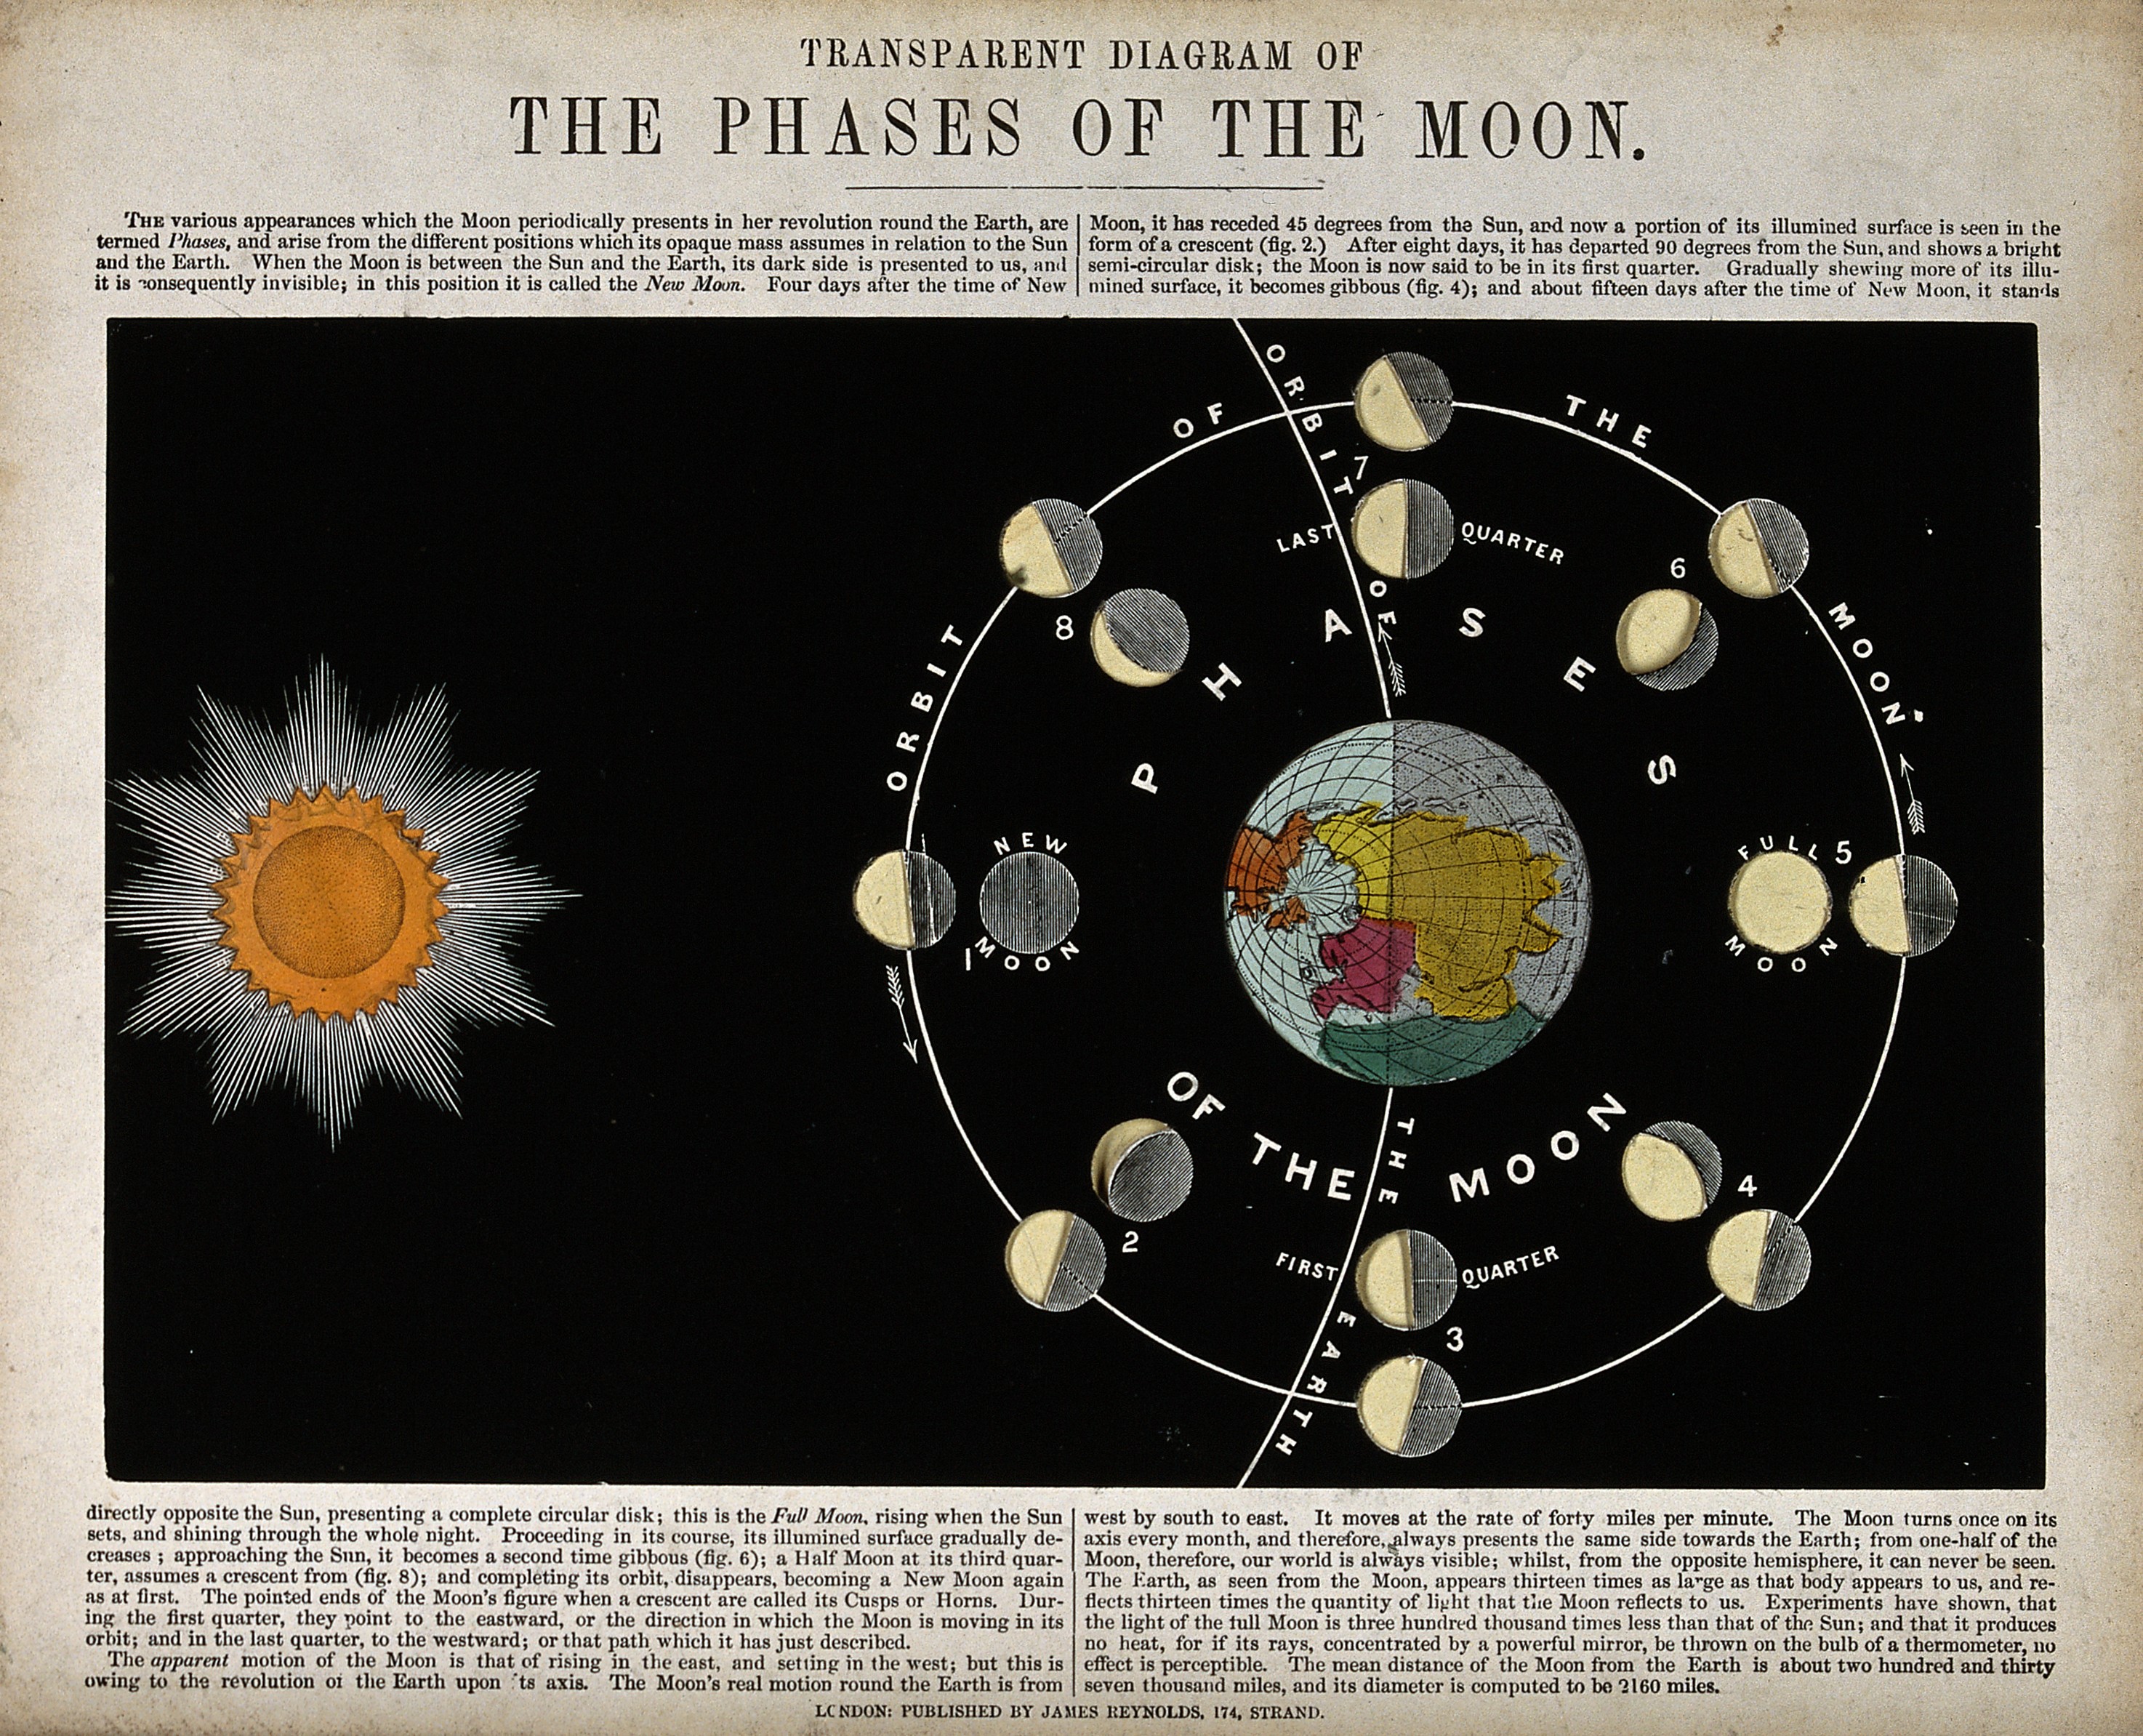 Image/Video/Audio: Diagram: Phases of the Moon Image/Video/Audio Source: https://upload.wikimedia.org/wikipedia/commons/8/8b/Astronomy%3B_a_diagram_of_the_phases_of_the_moon._Engraving._Wellcome_V0024718.jpg